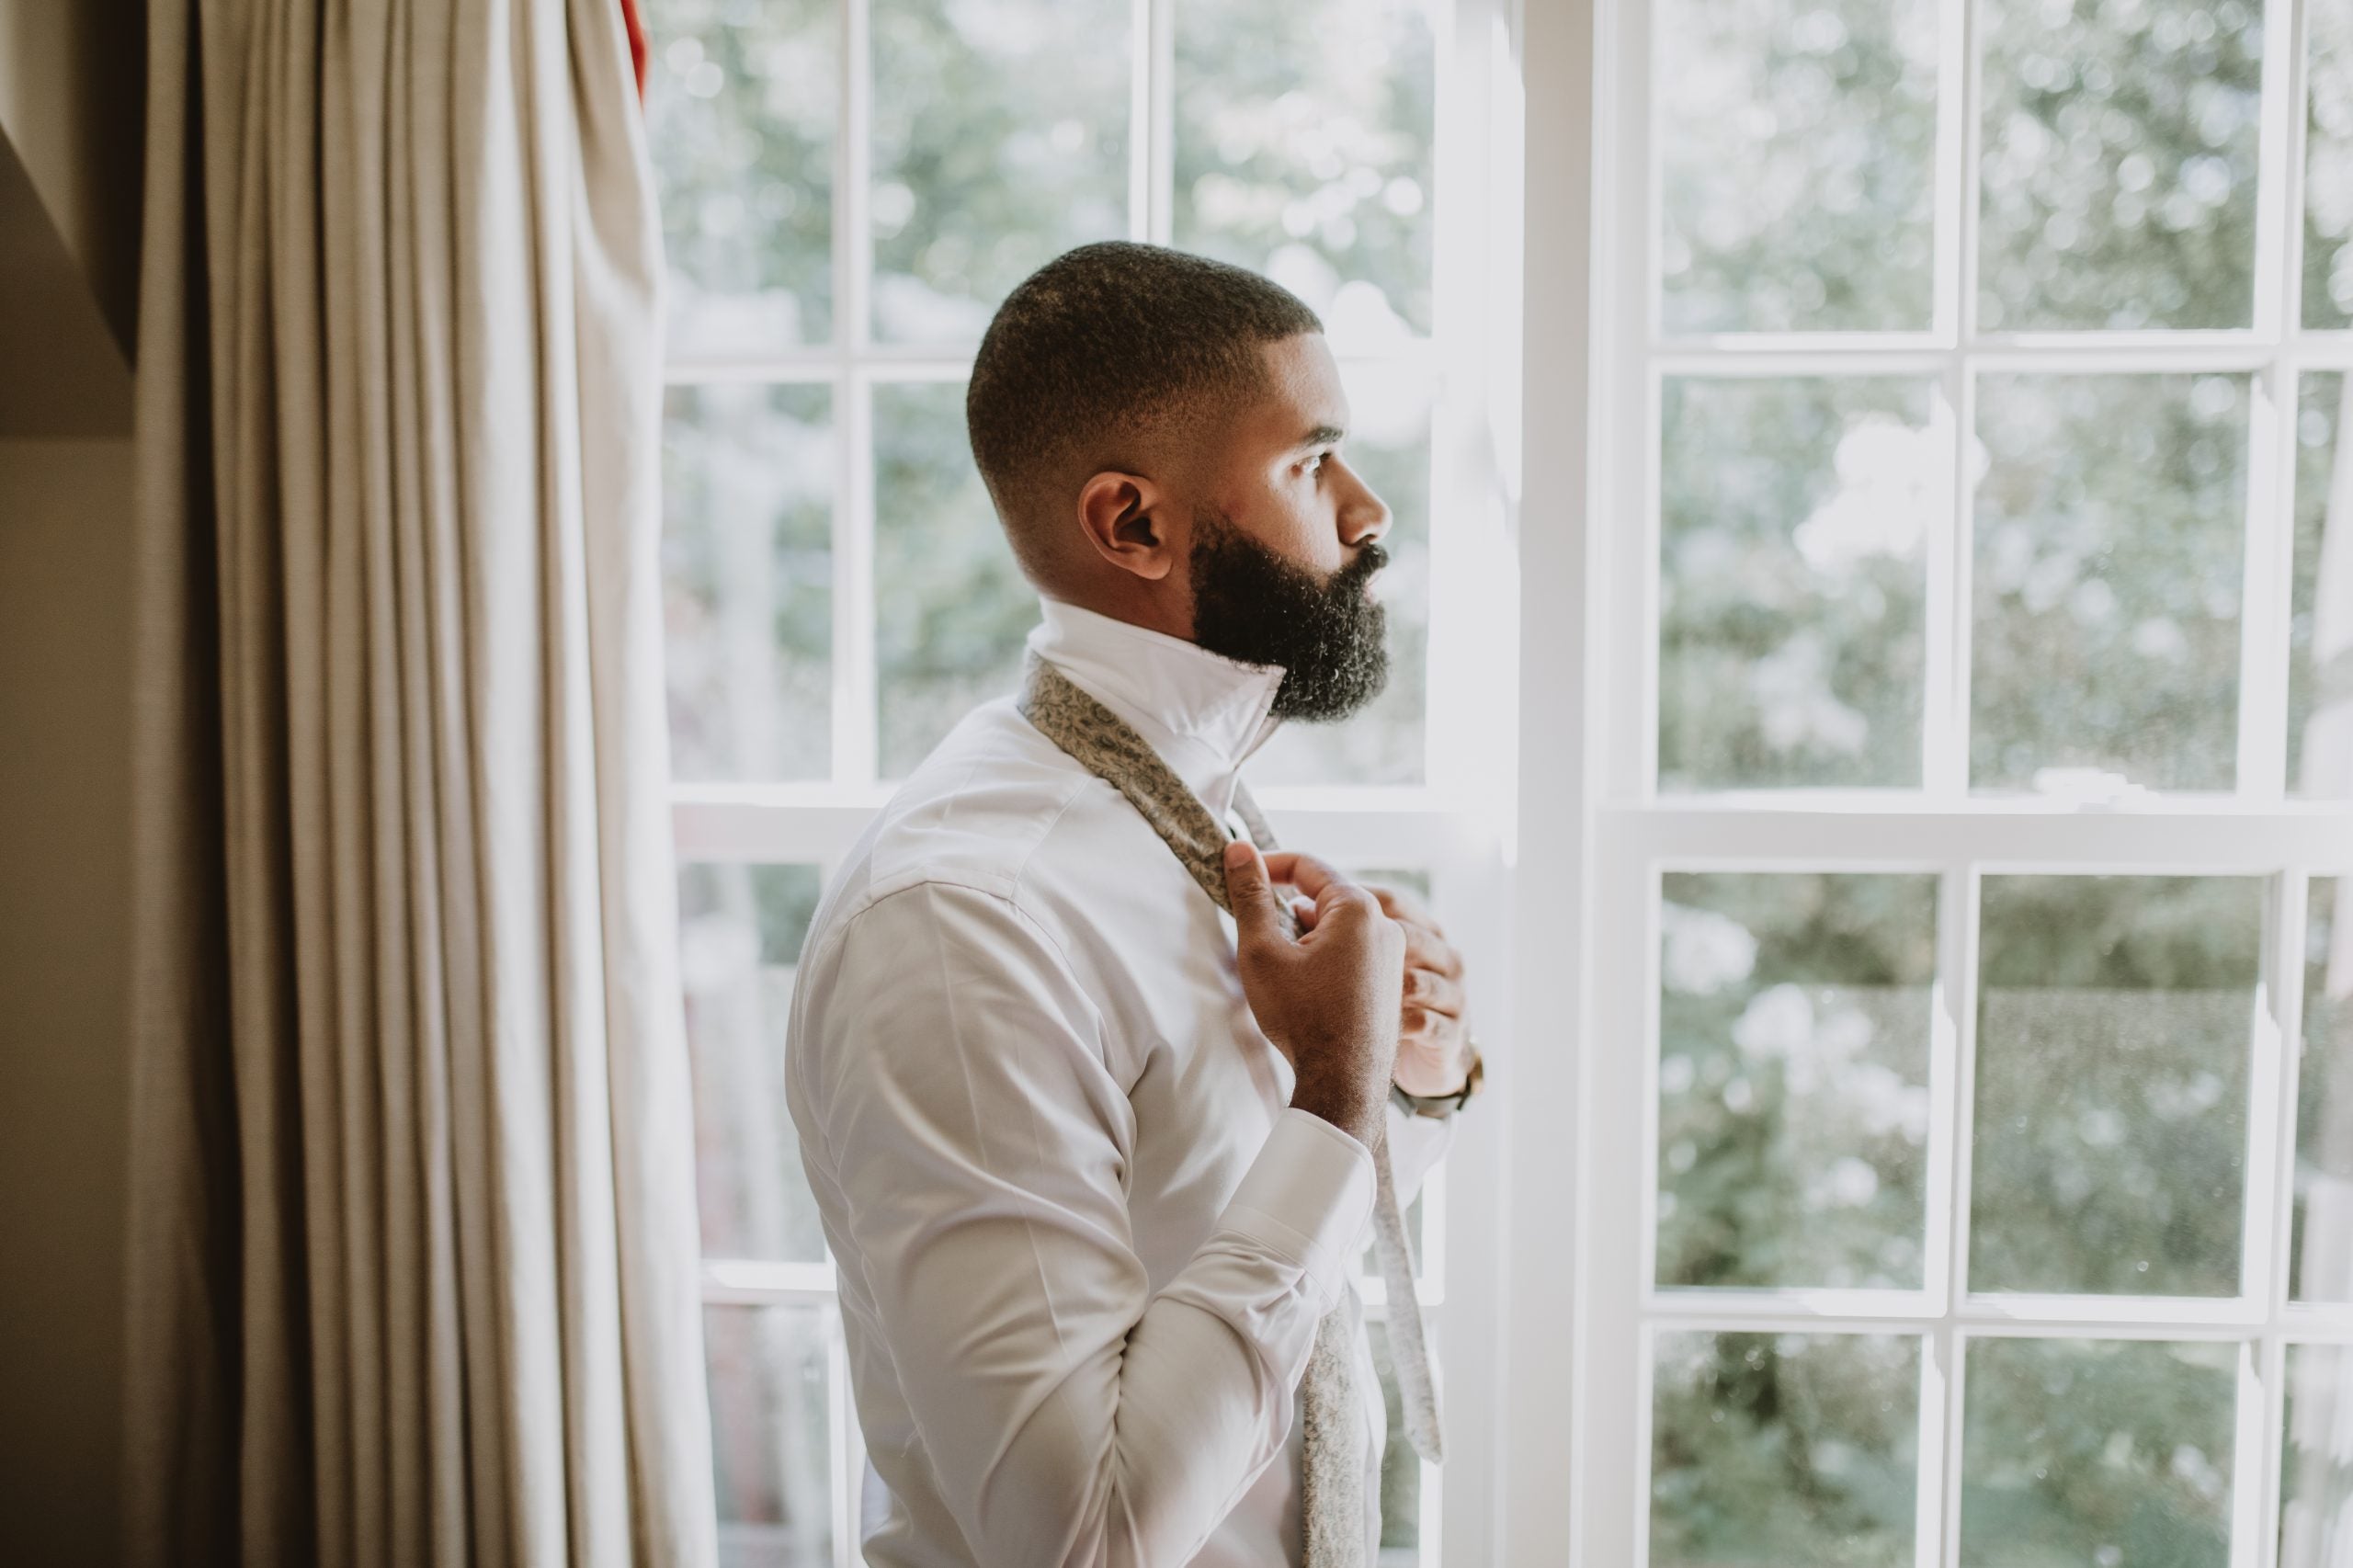 Rosco And Matthew's Ethereal North Carolina Wedding Was Intimate and Magical